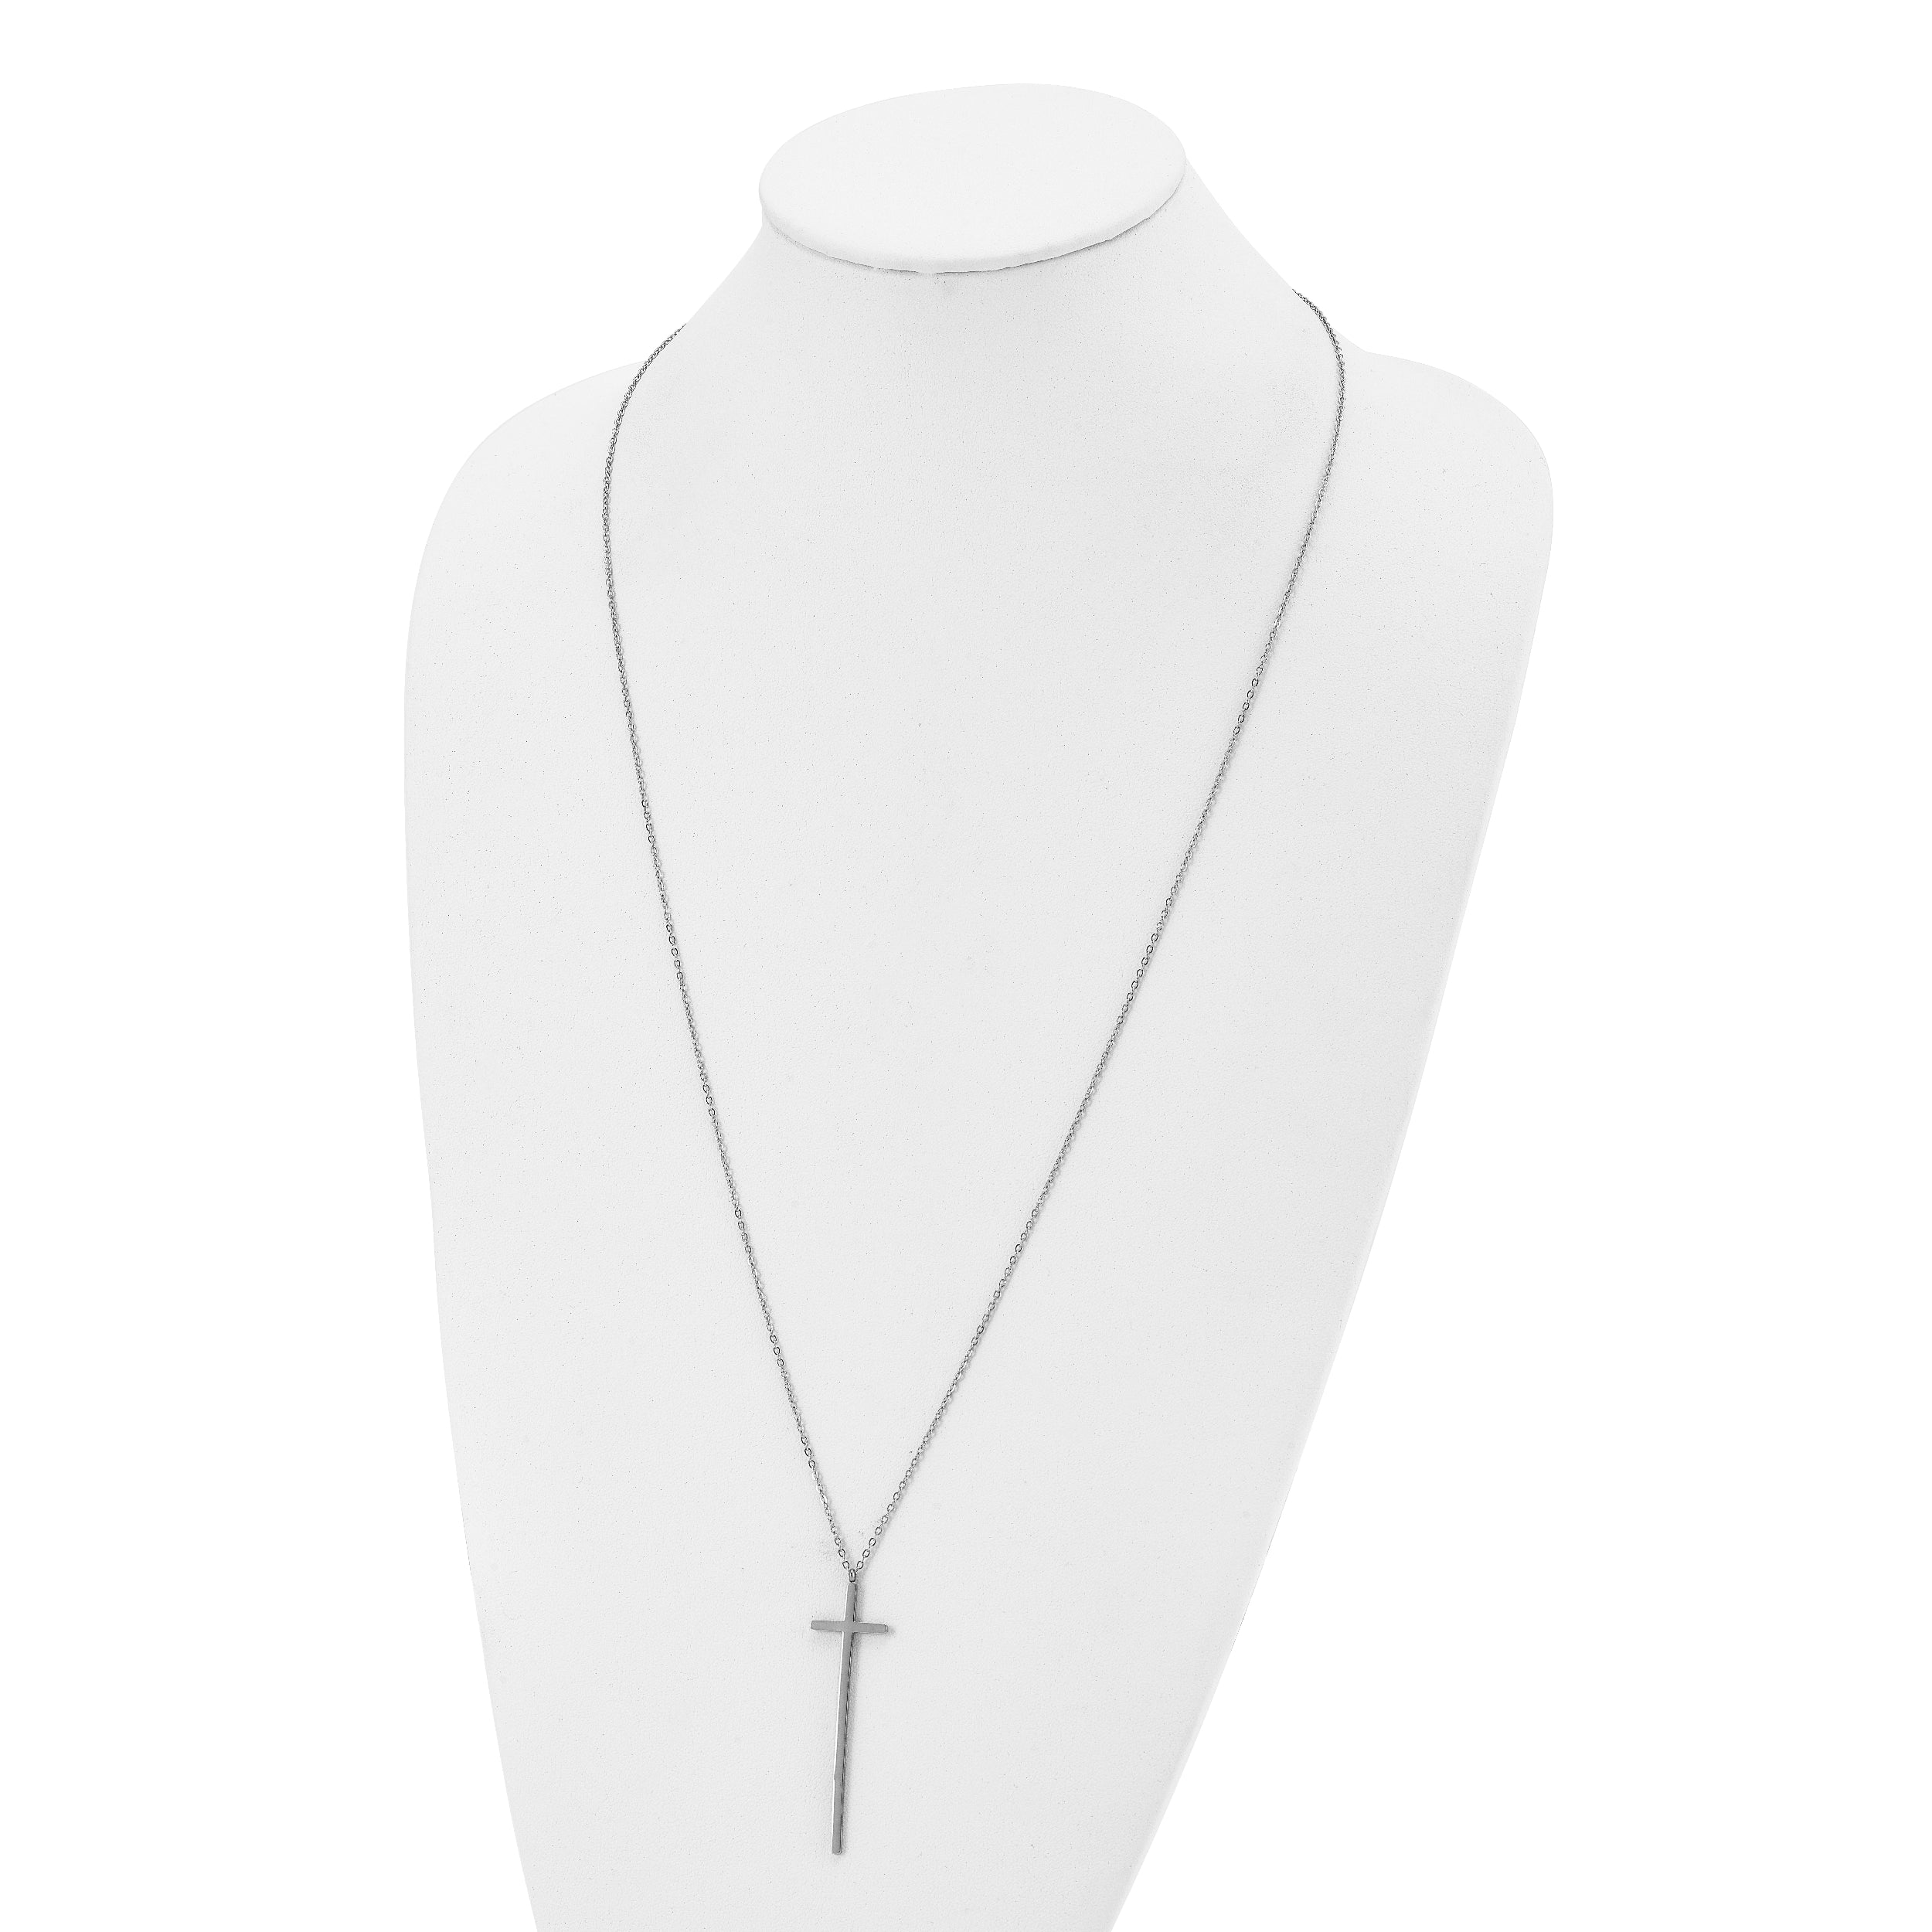 Chisel Stainless Steel Polished Long Cross Pendant on a 30 inch Cable Chain Necklace